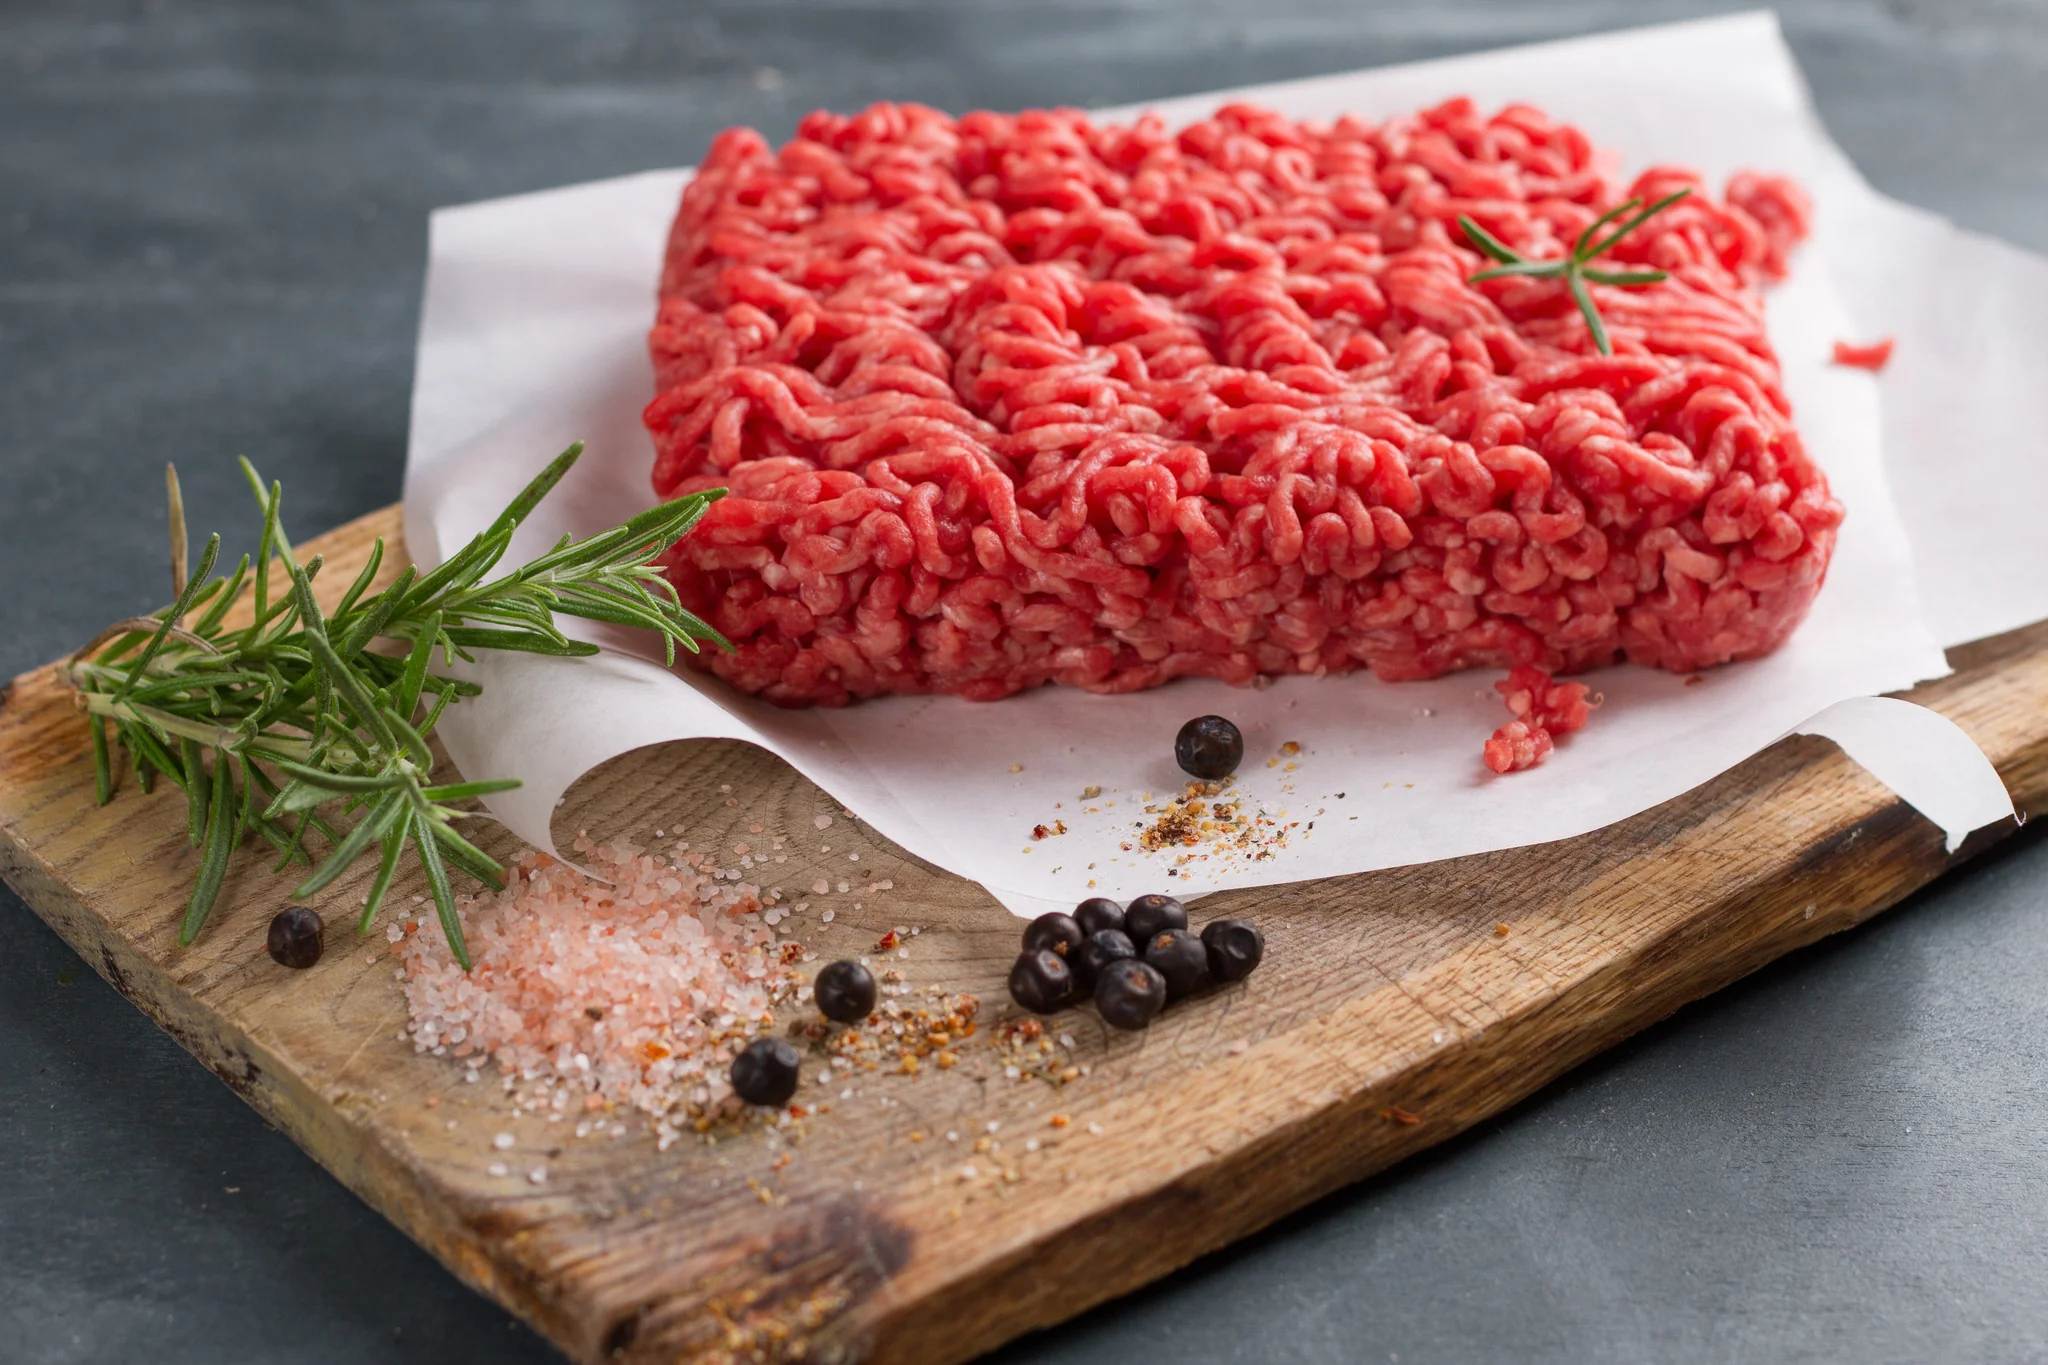 How Many Calories In Grass-Fed Ground Beef